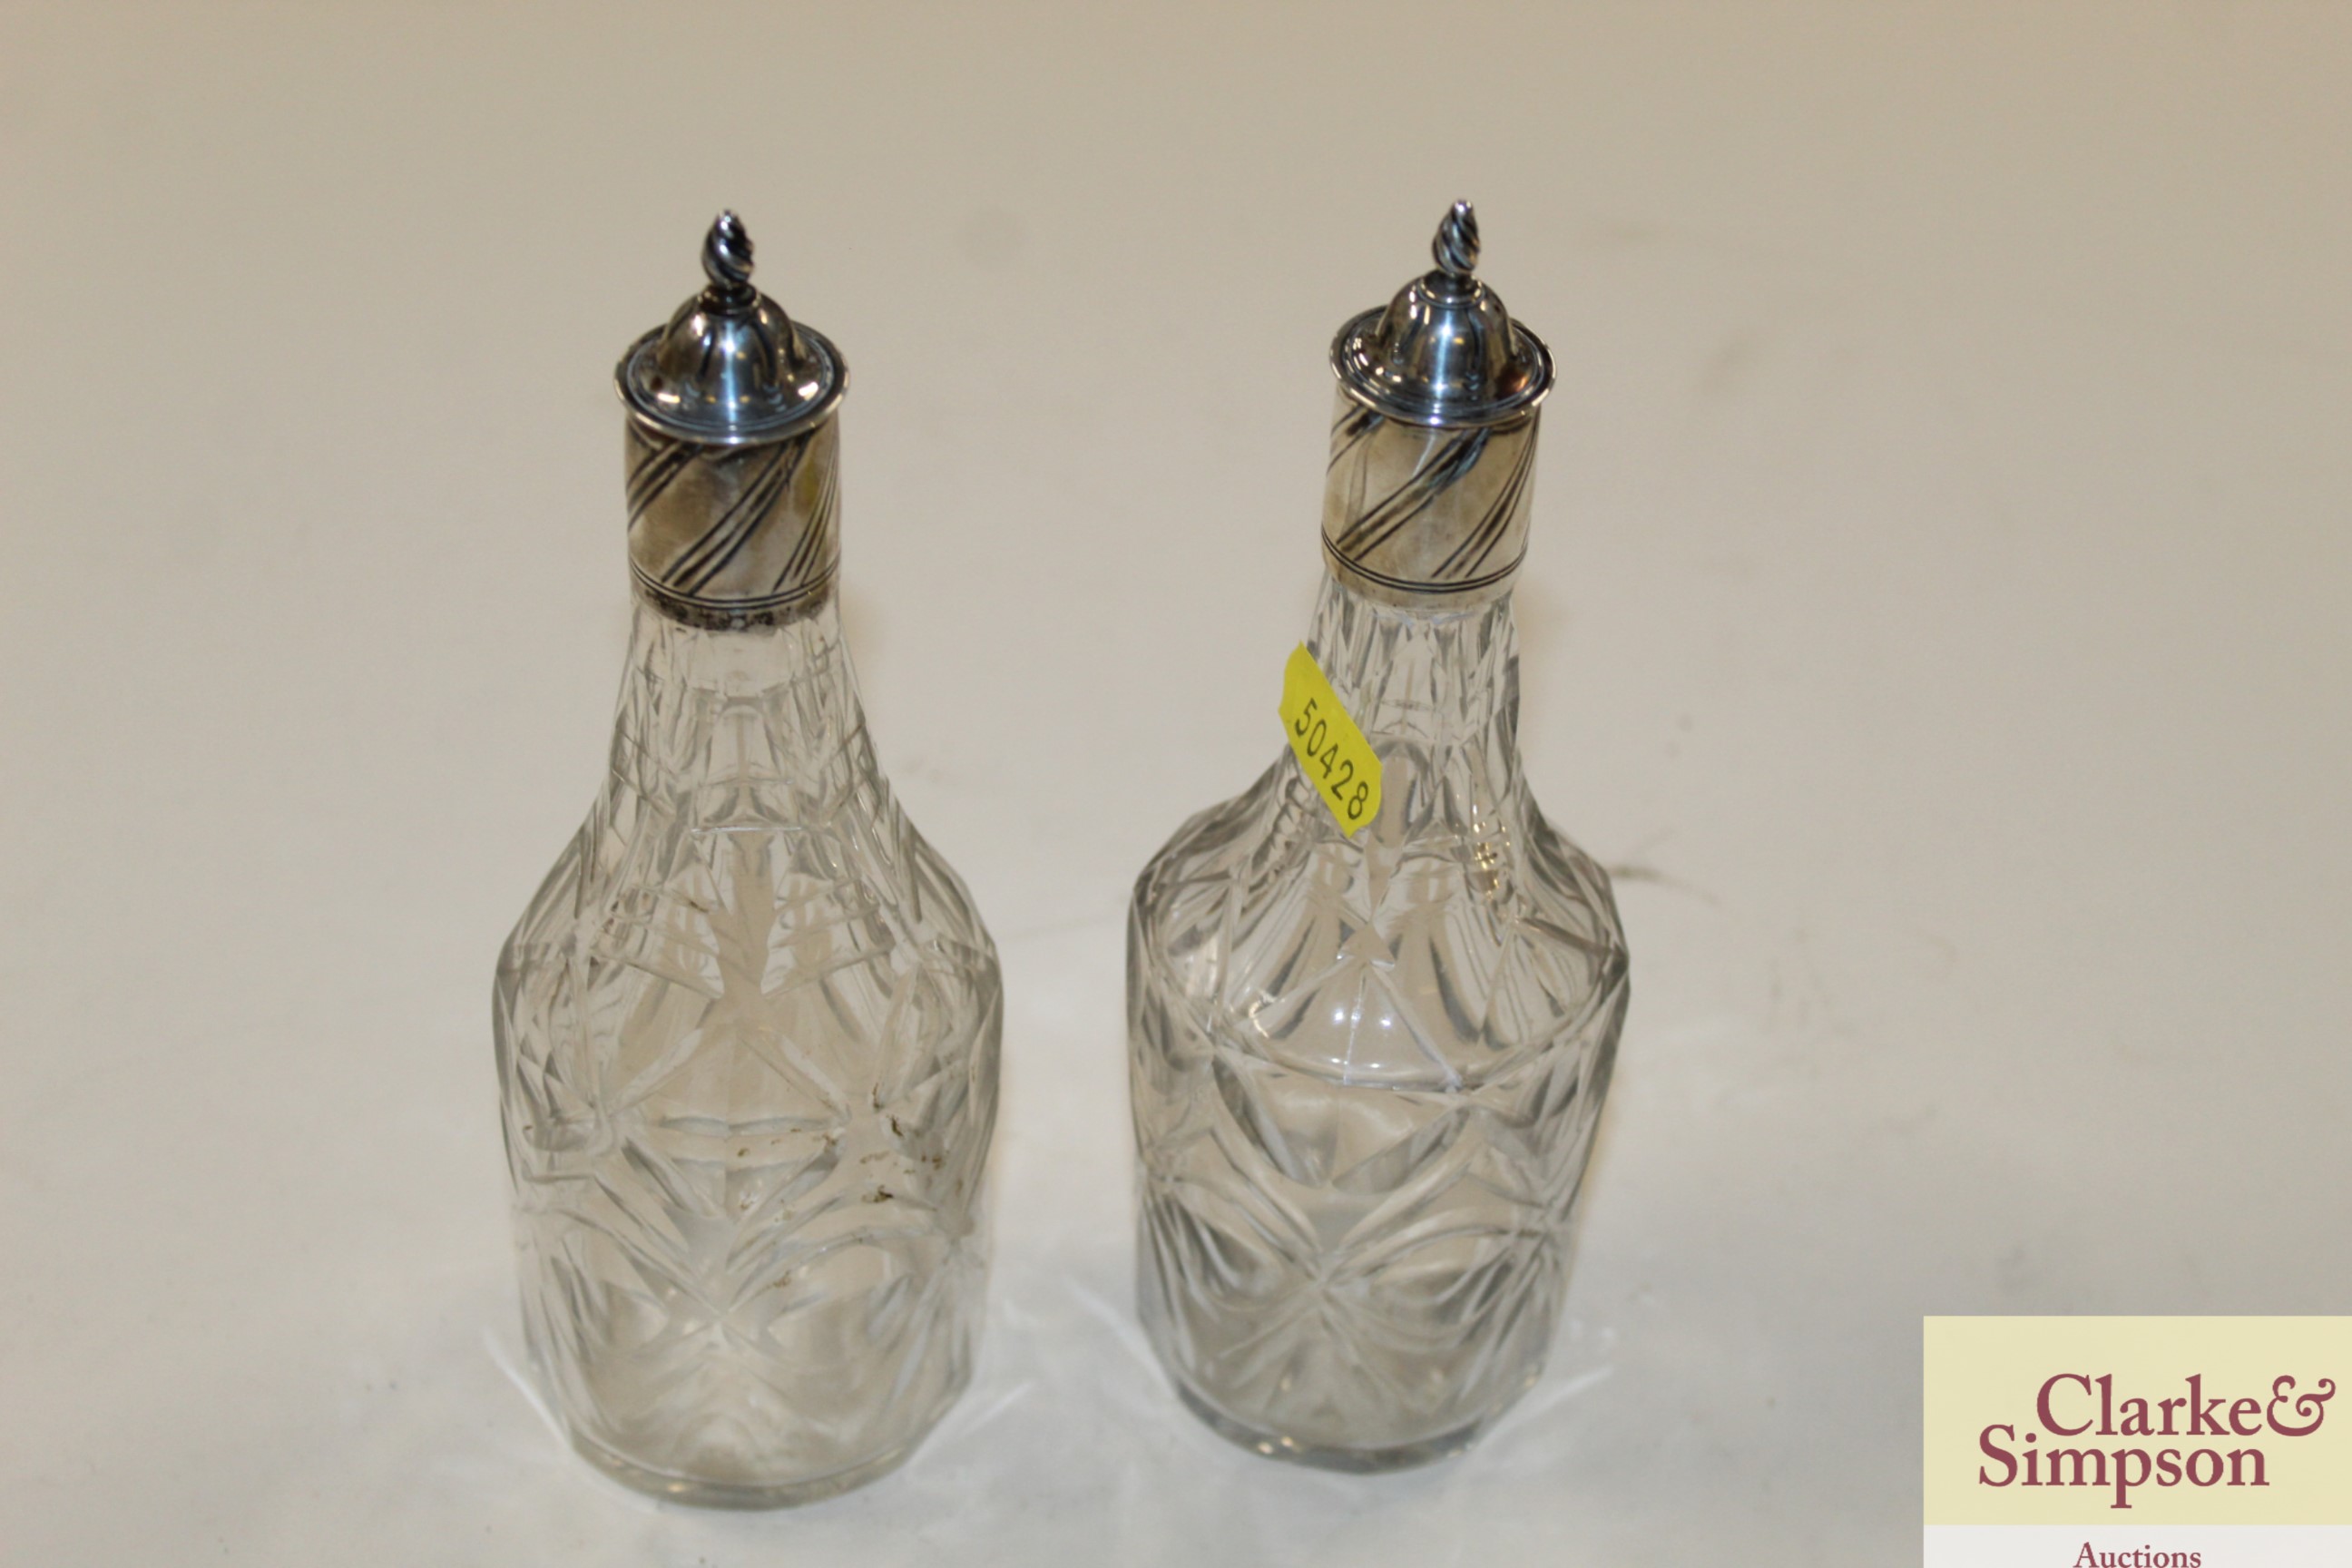 A pair of antique cut glass oil bottles with white